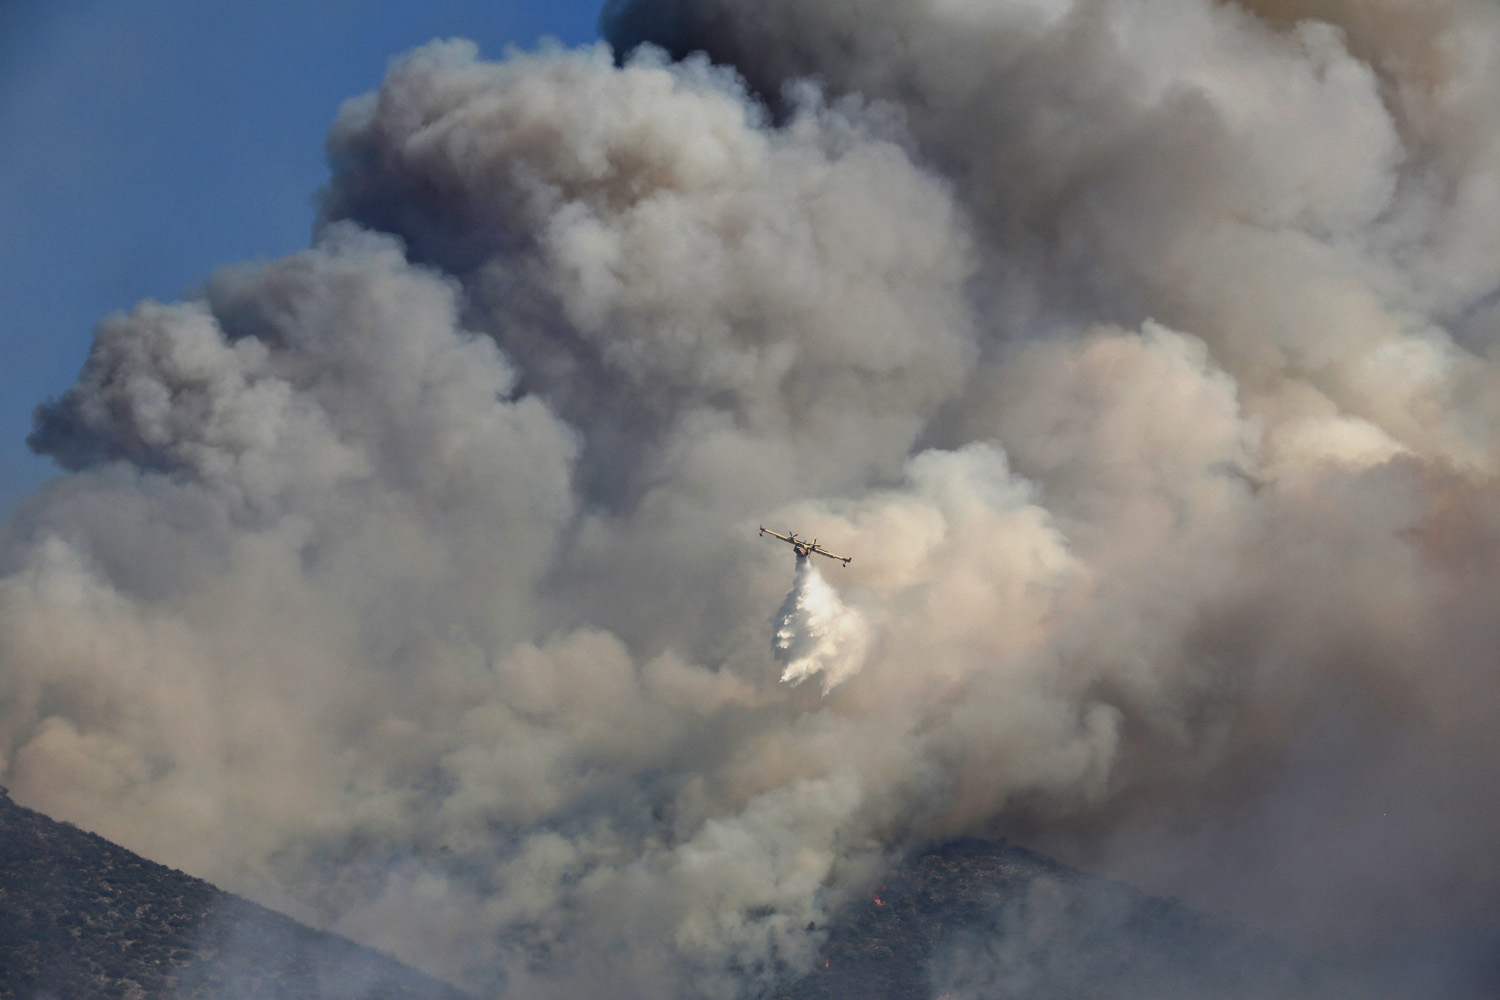 A firefighting airplane drops water over a forest fire at Markopoulo region